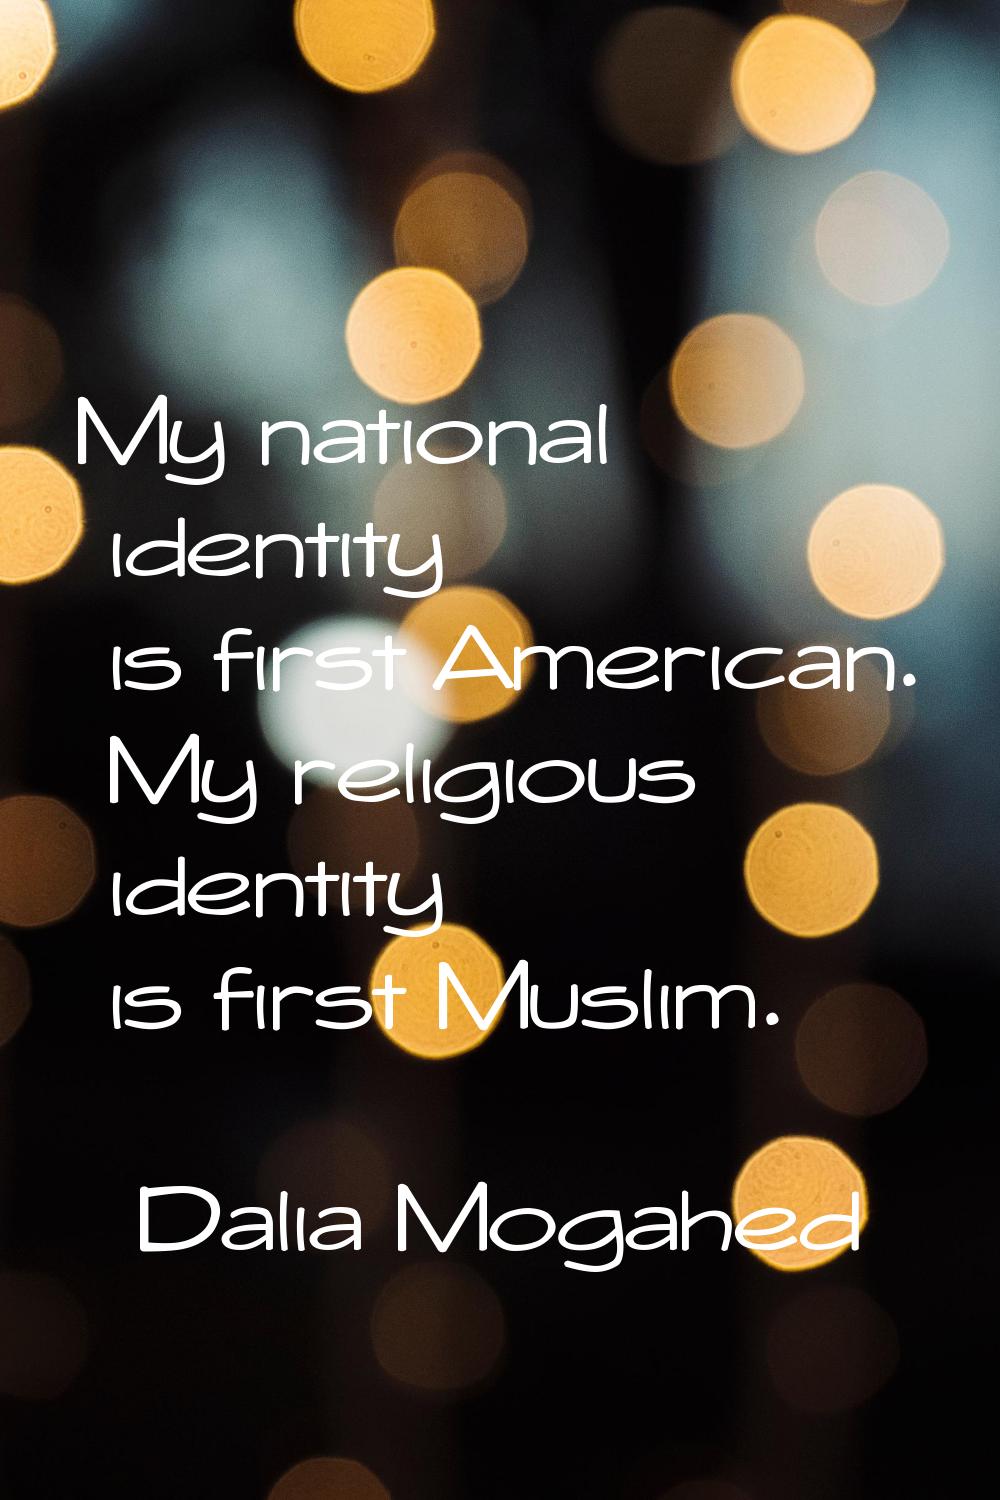 My national identity is first American. My religious identity is first Muslim.